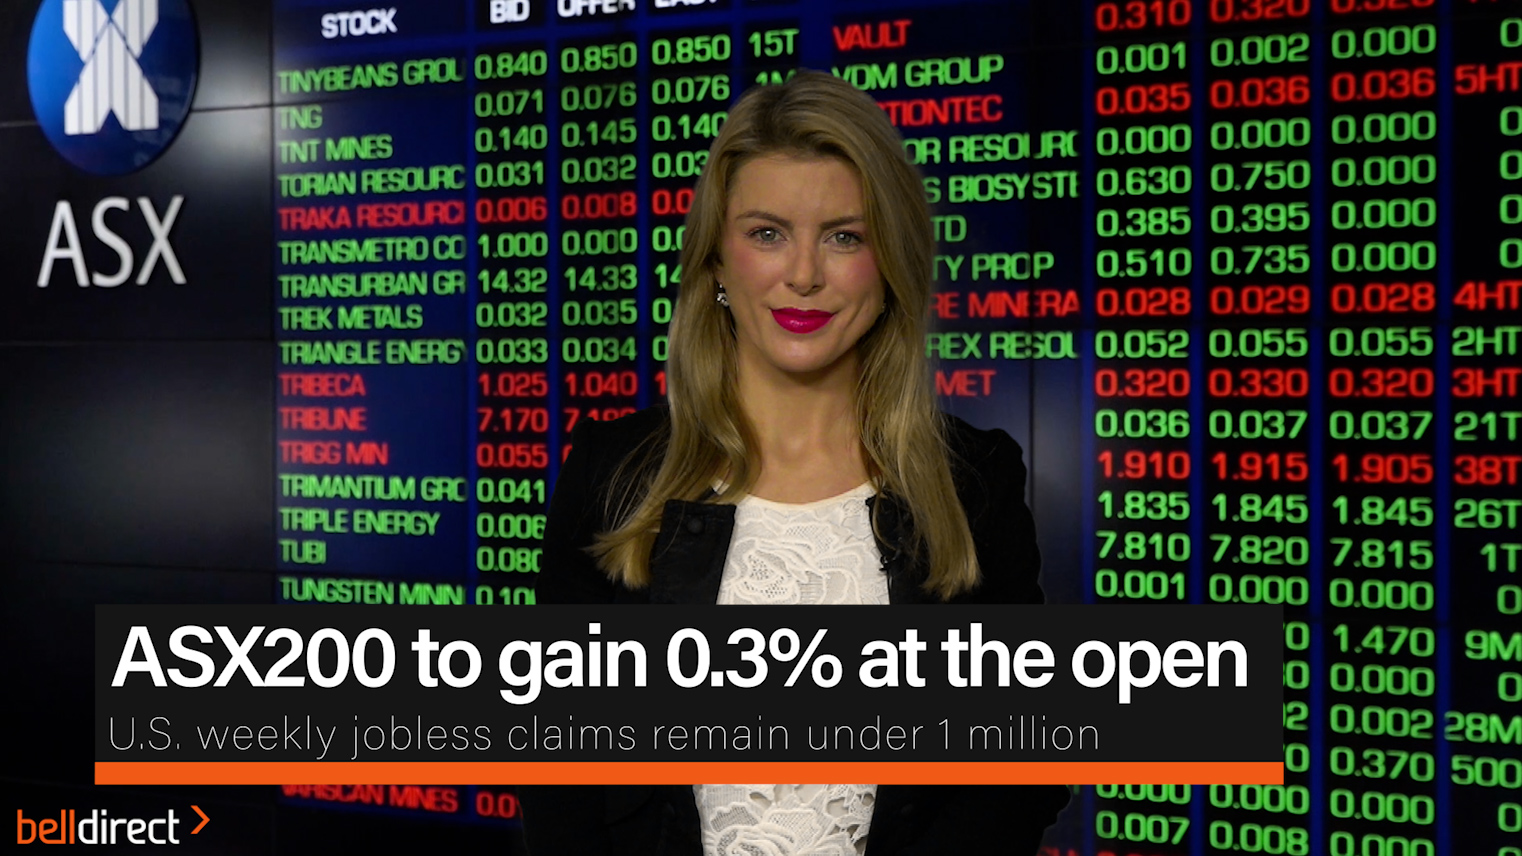 ASX200 to gain 0.3% at the open